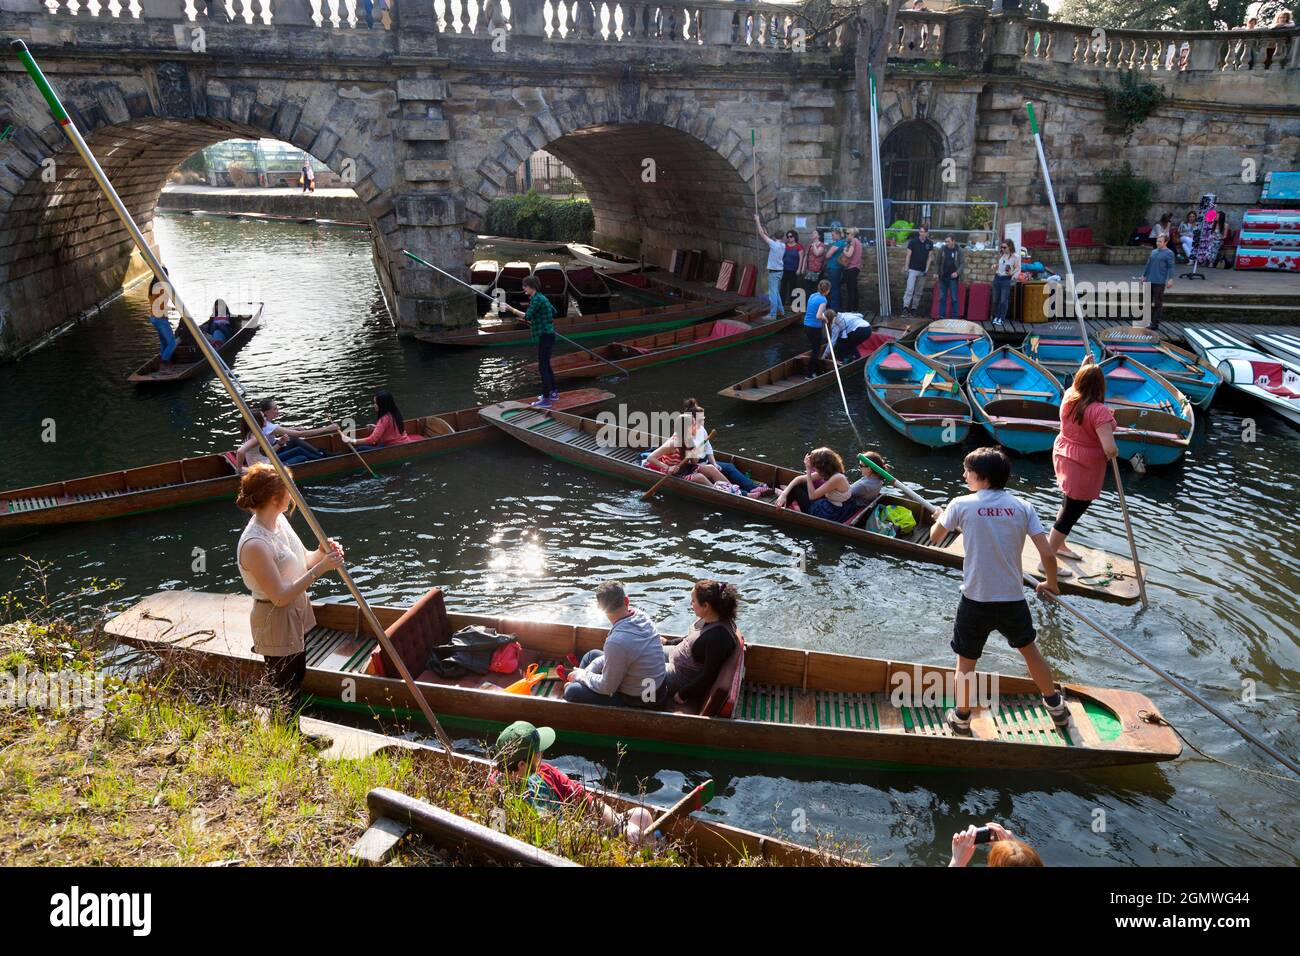 Oxford, England - 2012; This area of the Cherwell River by Magdalen Bridge is a favourite spot for punting and rowing during the spring and summer mon Stock Photo